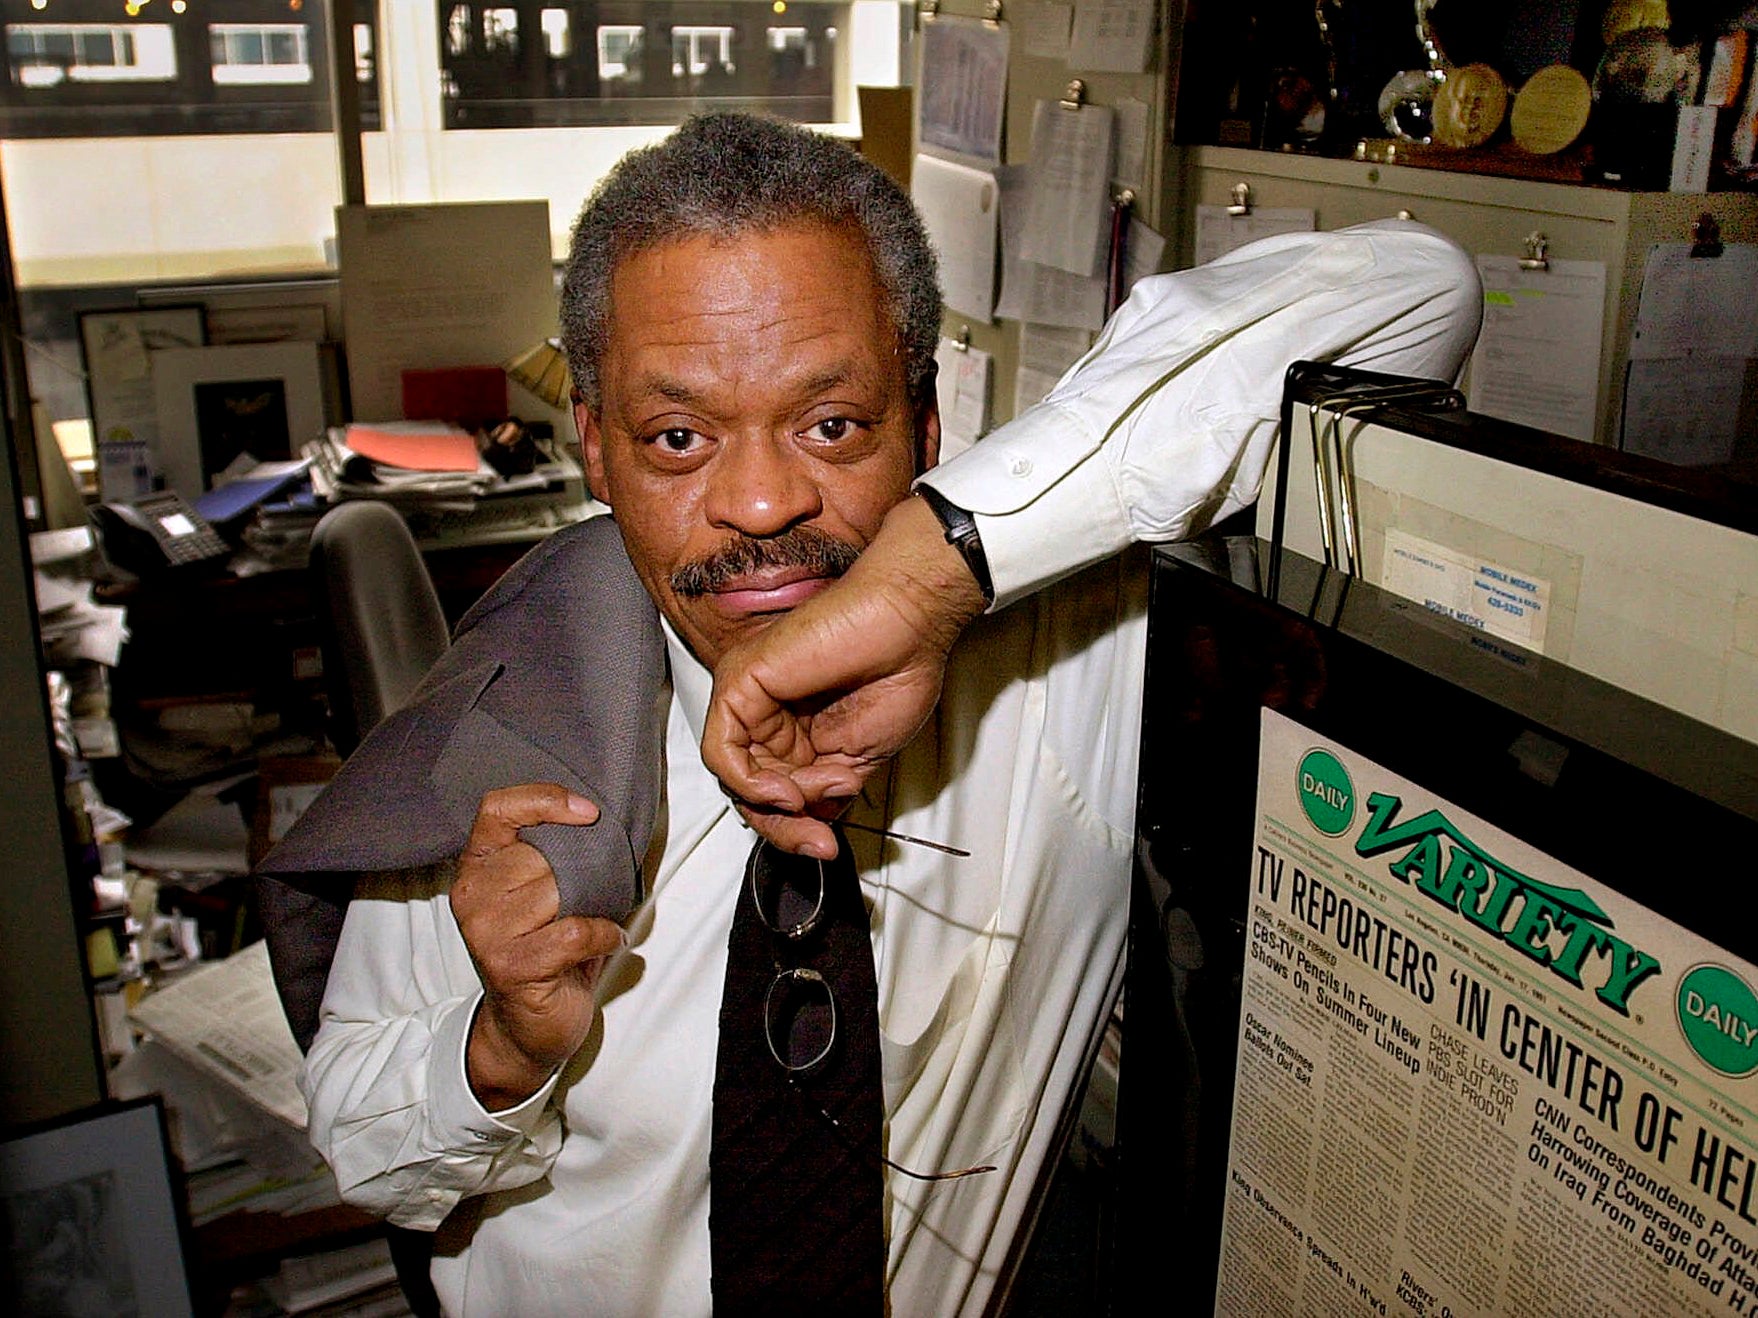 Shaw in his office at CNN's Washington bureau on 15 February 2001. He retired two weeks later